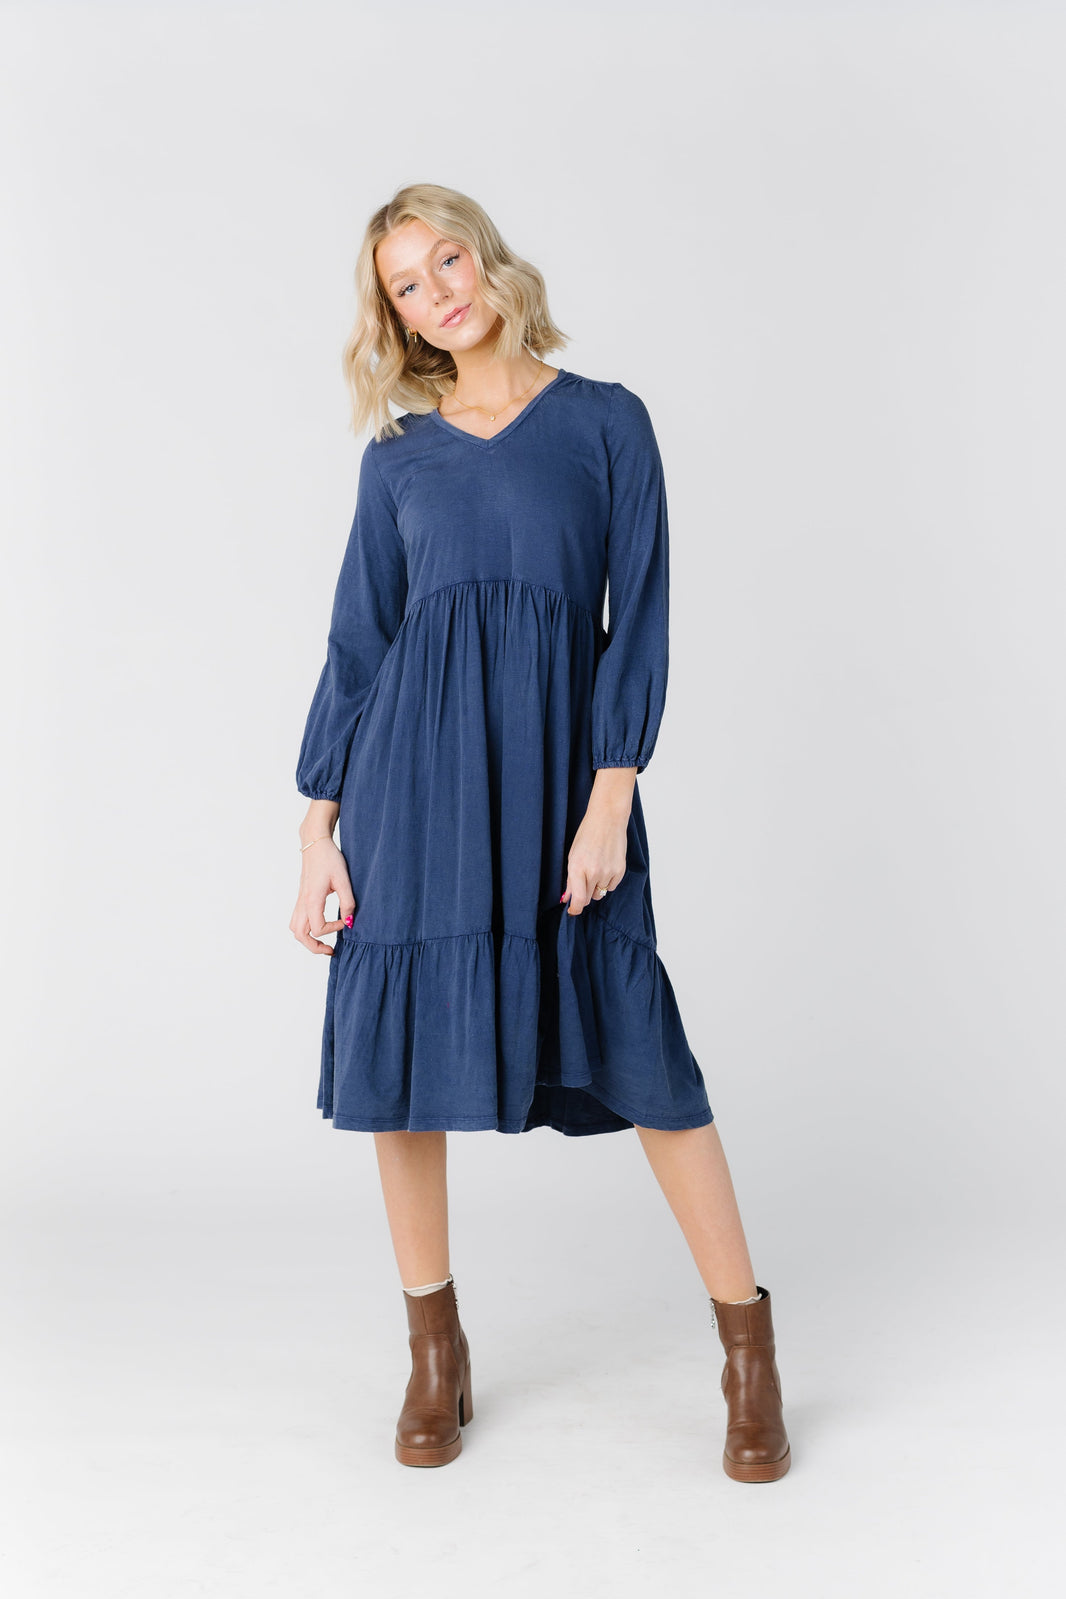 Plus Size Dresses – Called to Surf – Page 2